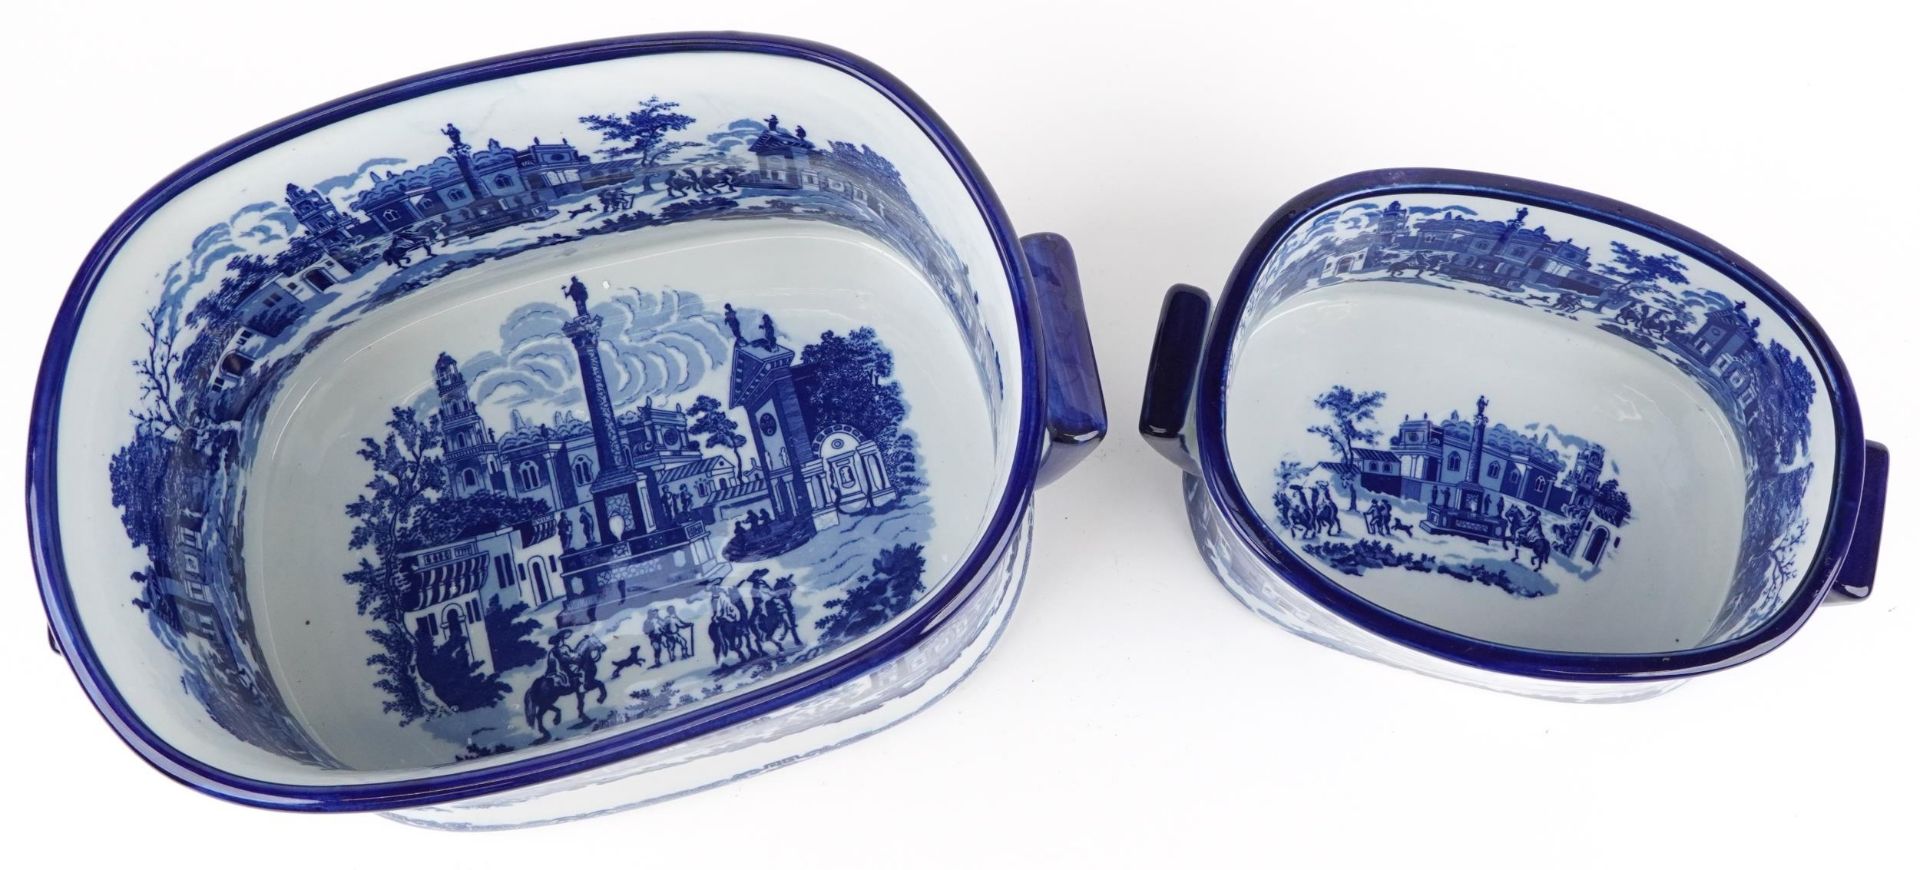 Two blue and white porcelain planters with twin handles, each decorated with cavaliers on horseback, - Image 2 of 4